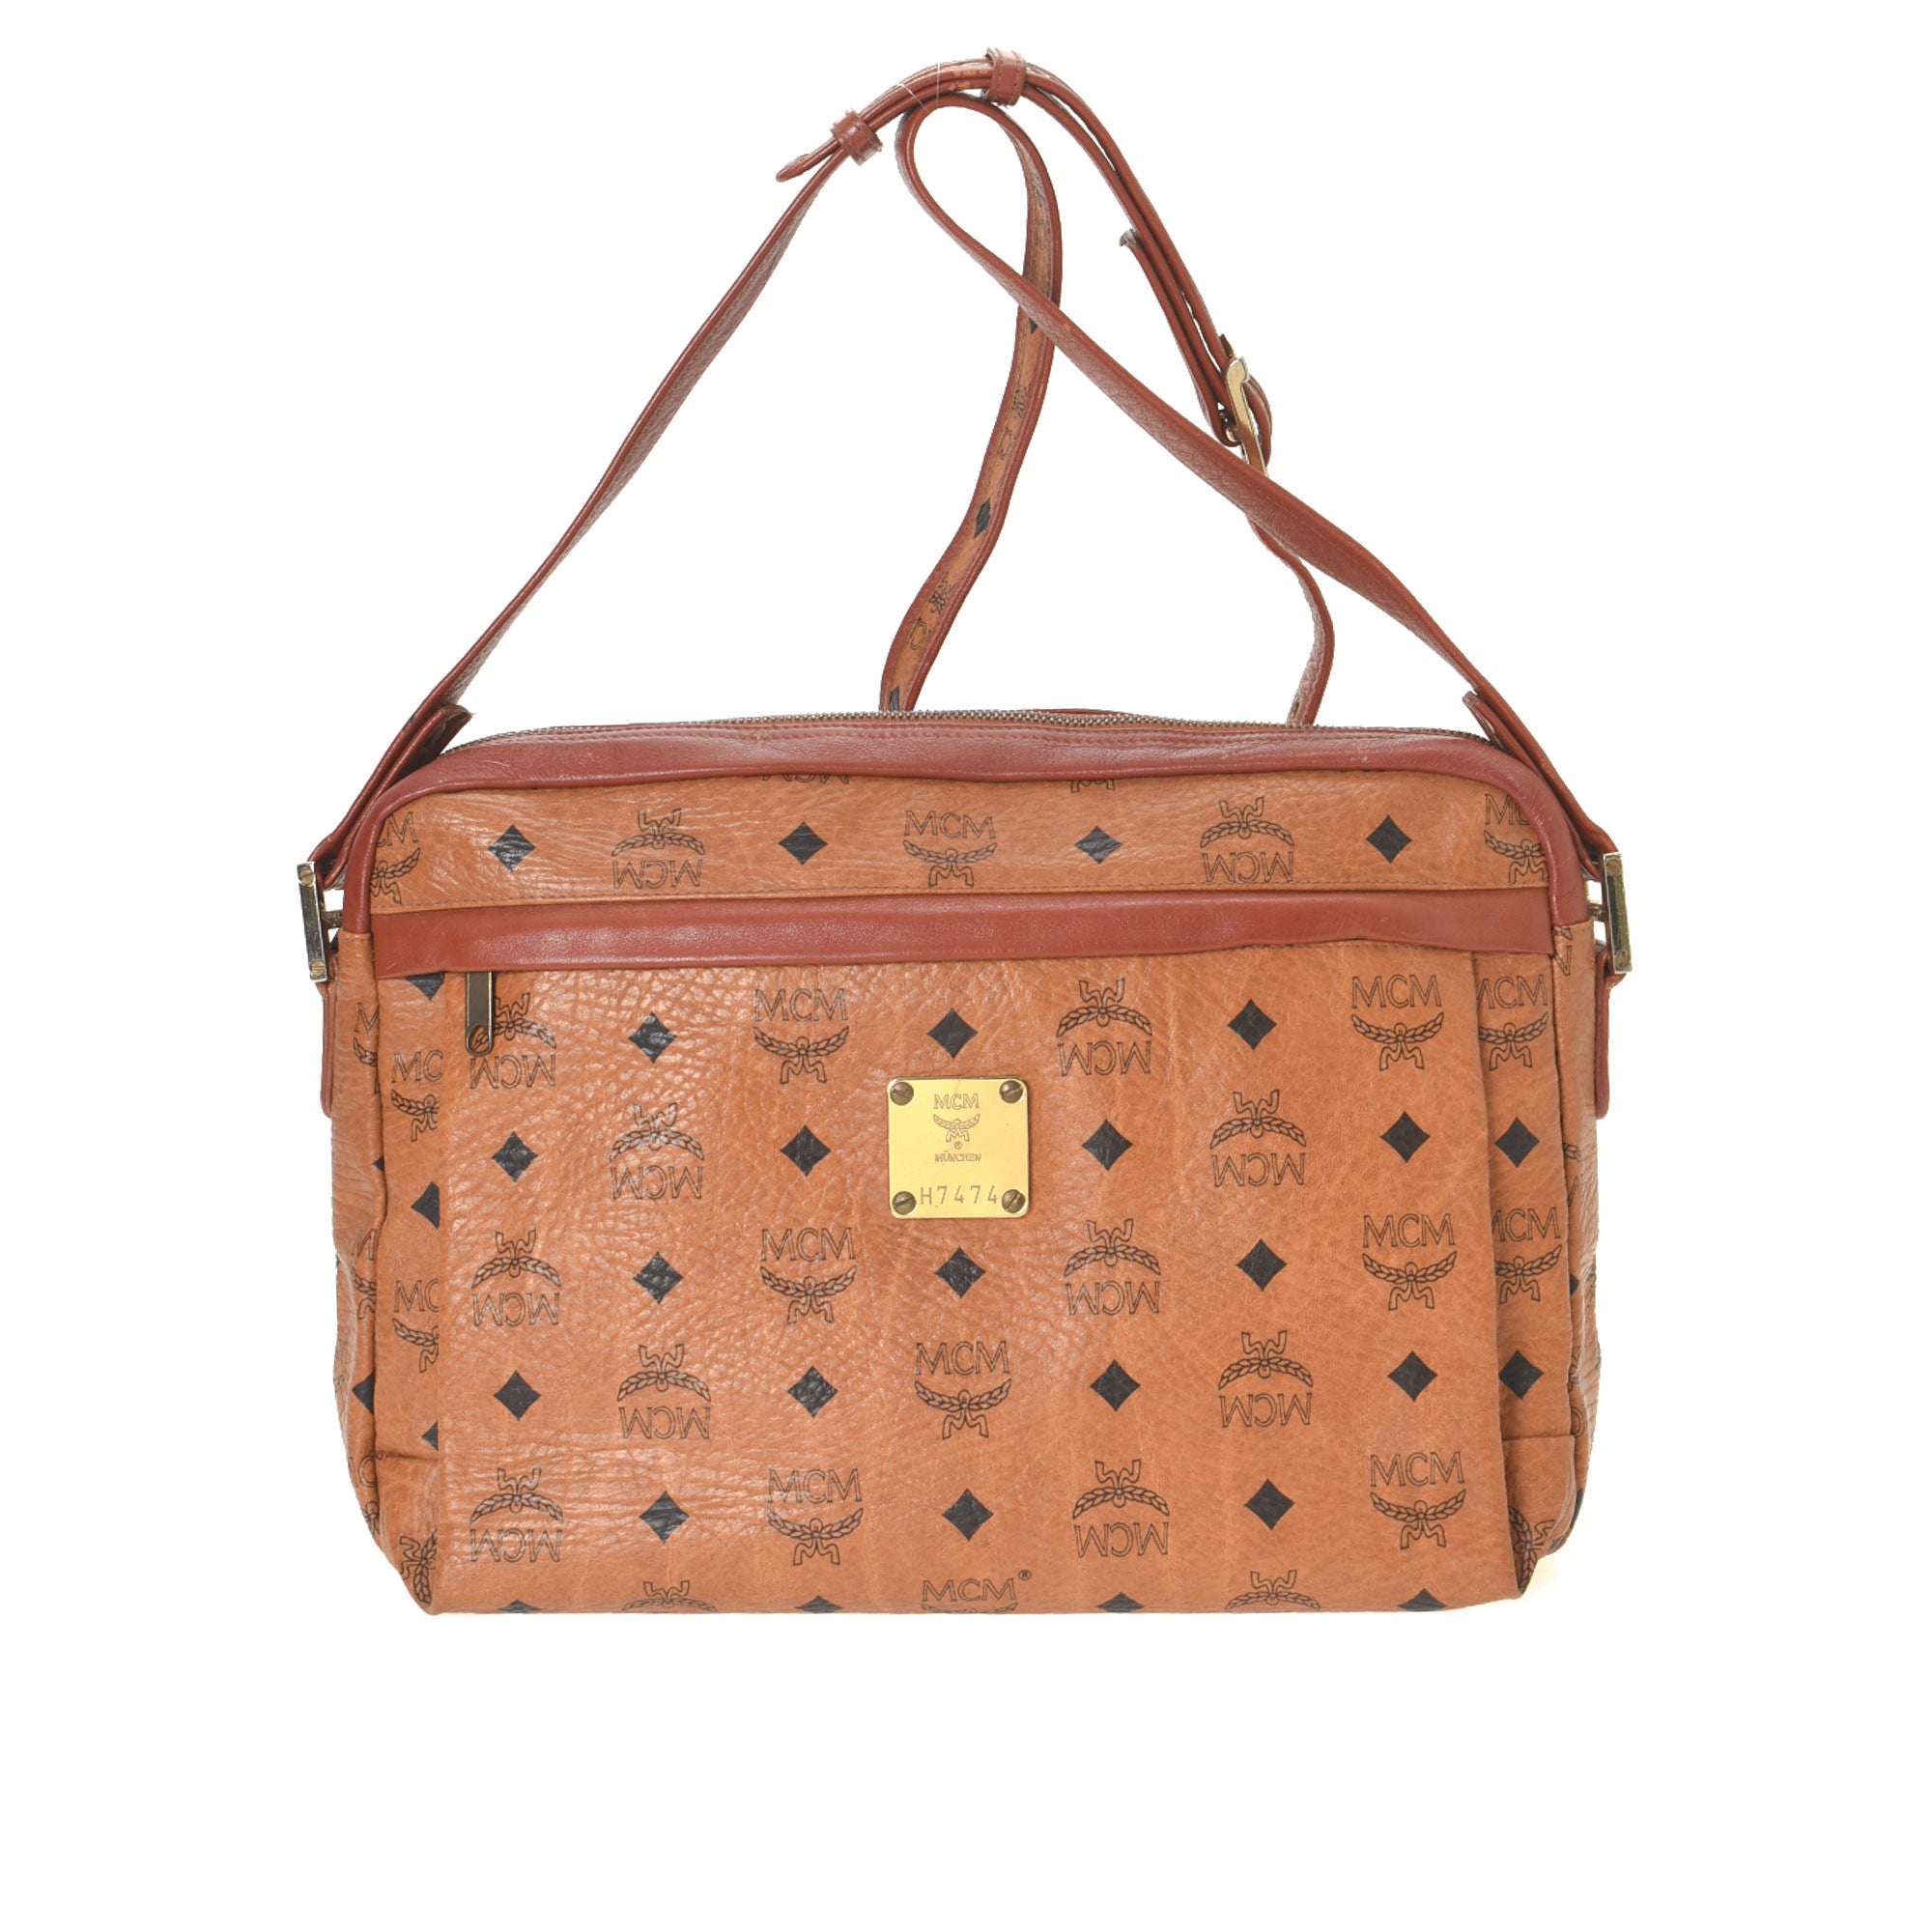 Sold at Auction: AUTHENTIC MCM LEATHER HAND BAG